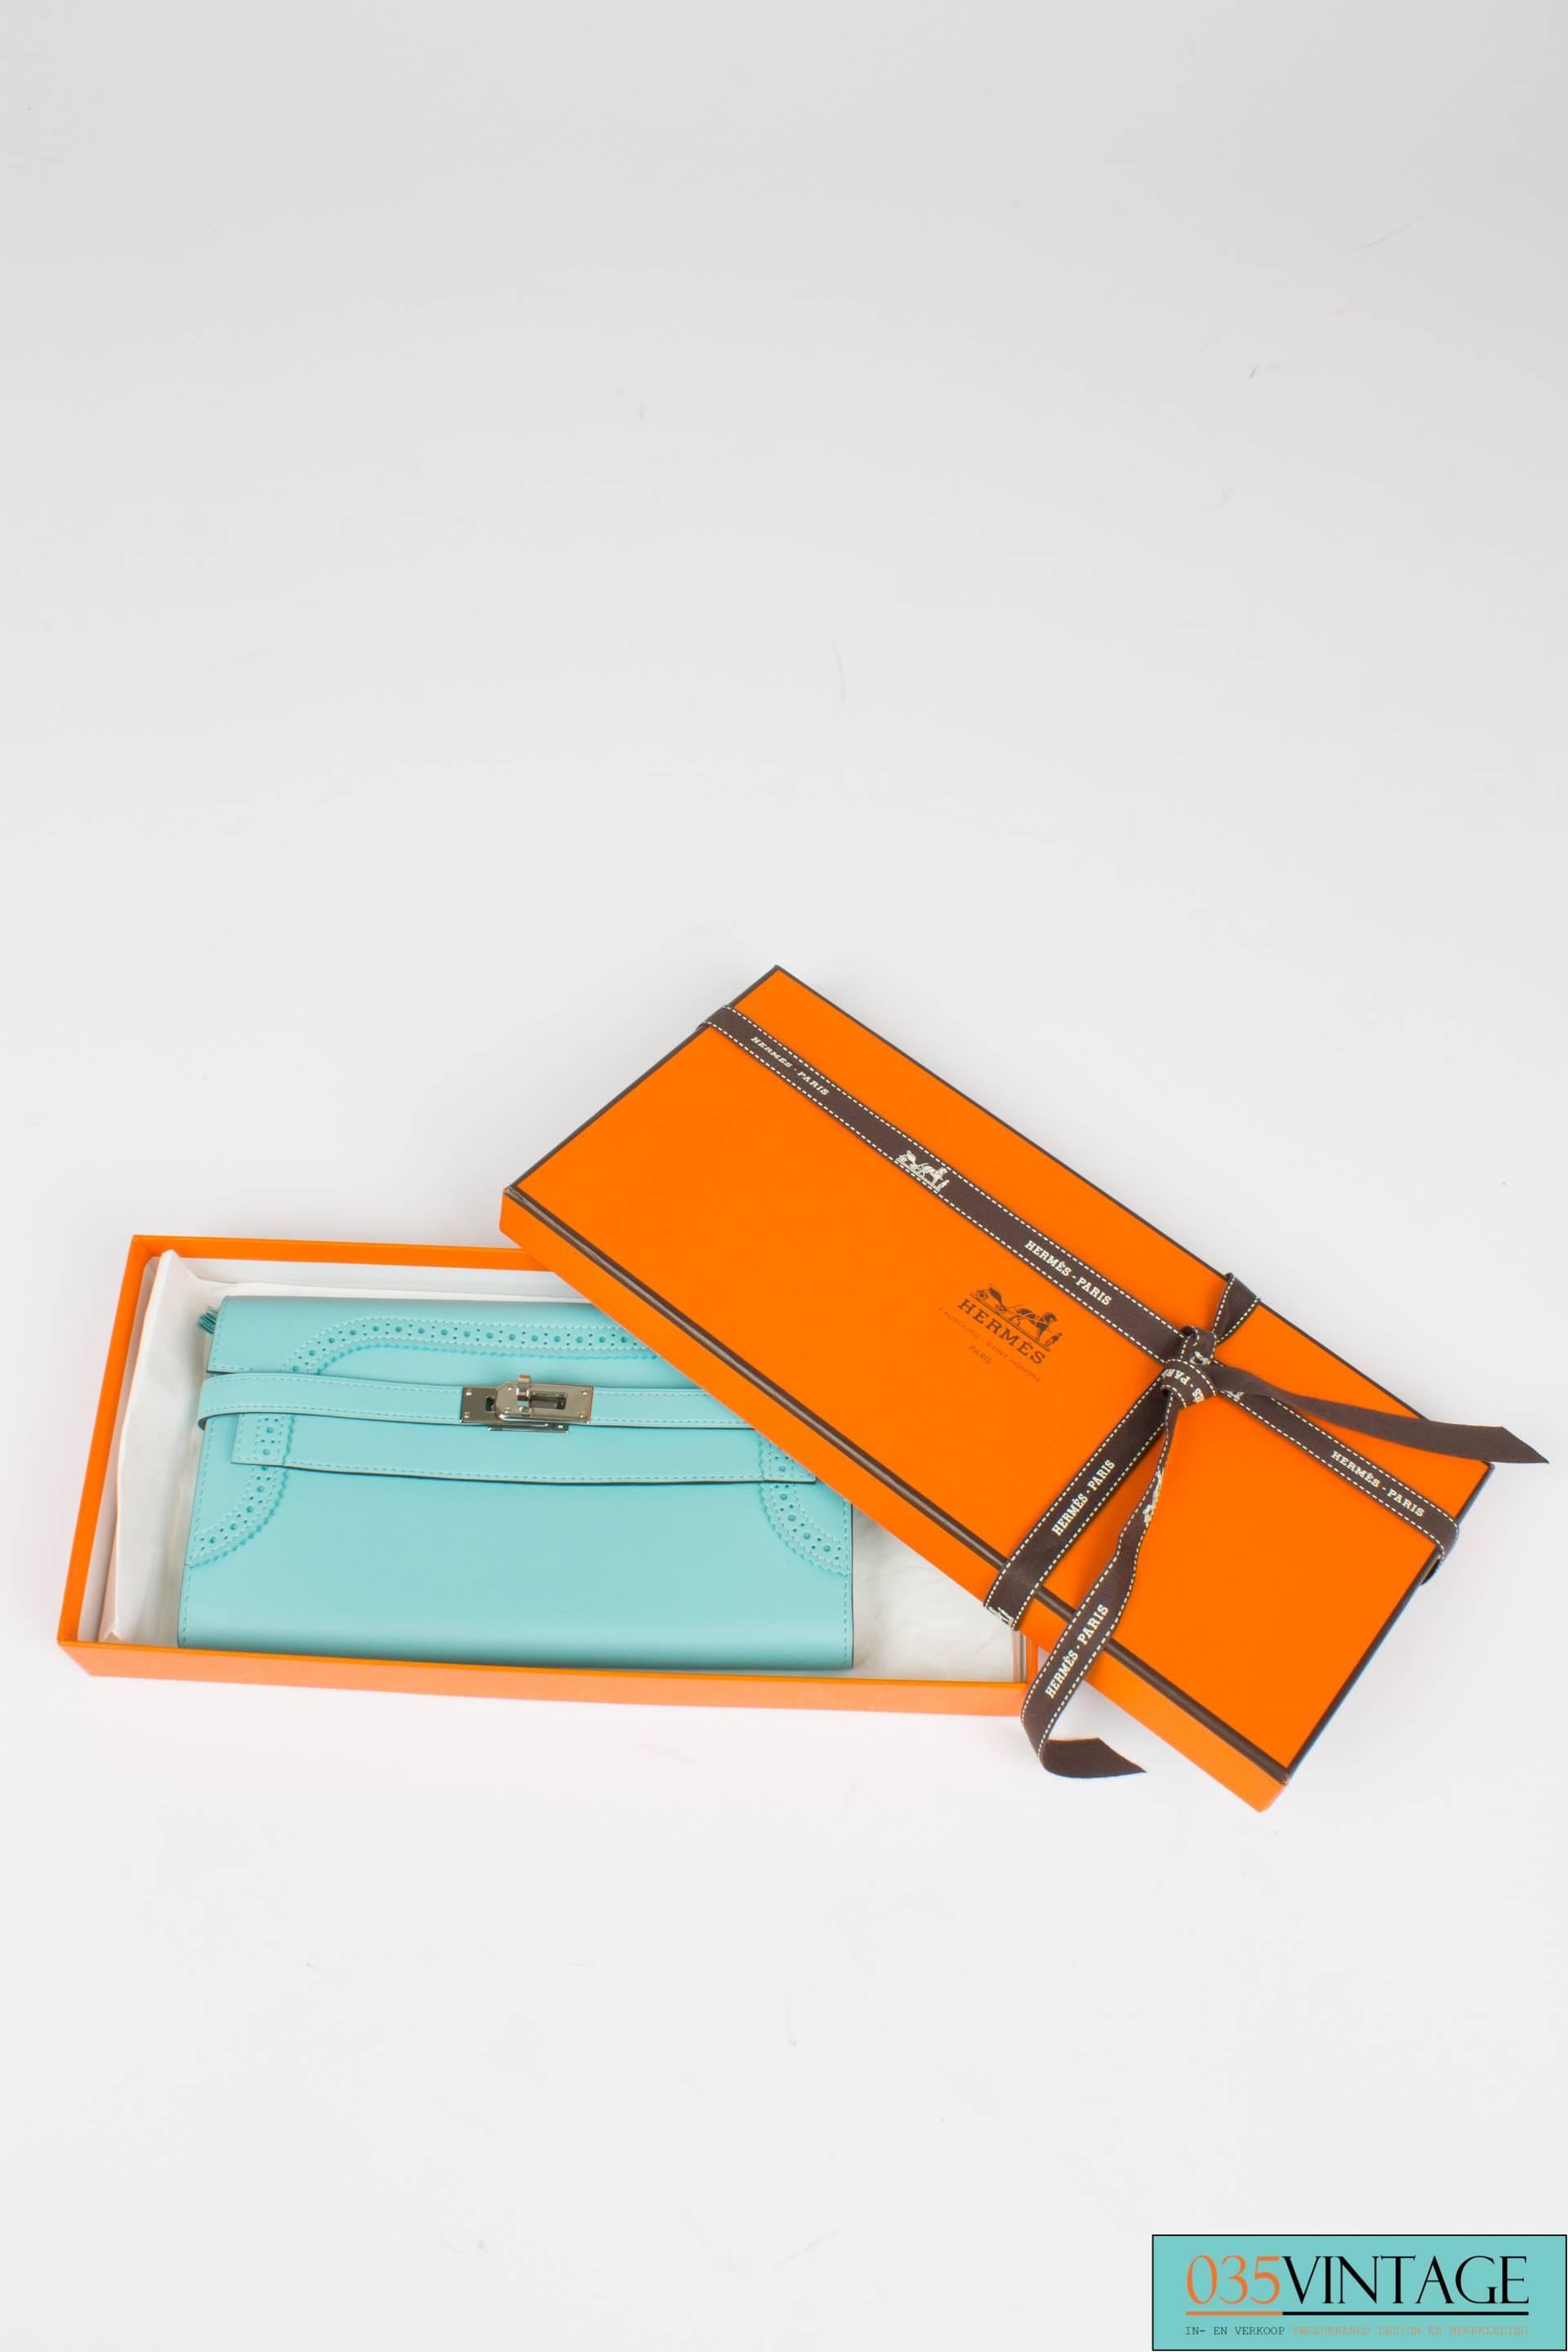 This one is sooo beautiful! It is the Hermès Kelly Portefeuille Classique Ghillies Veau Swift in the color Blue Atoll. It is a limited edition...

An oblong wallet which also can be used as a small clutch. Silver hardware on the front, the